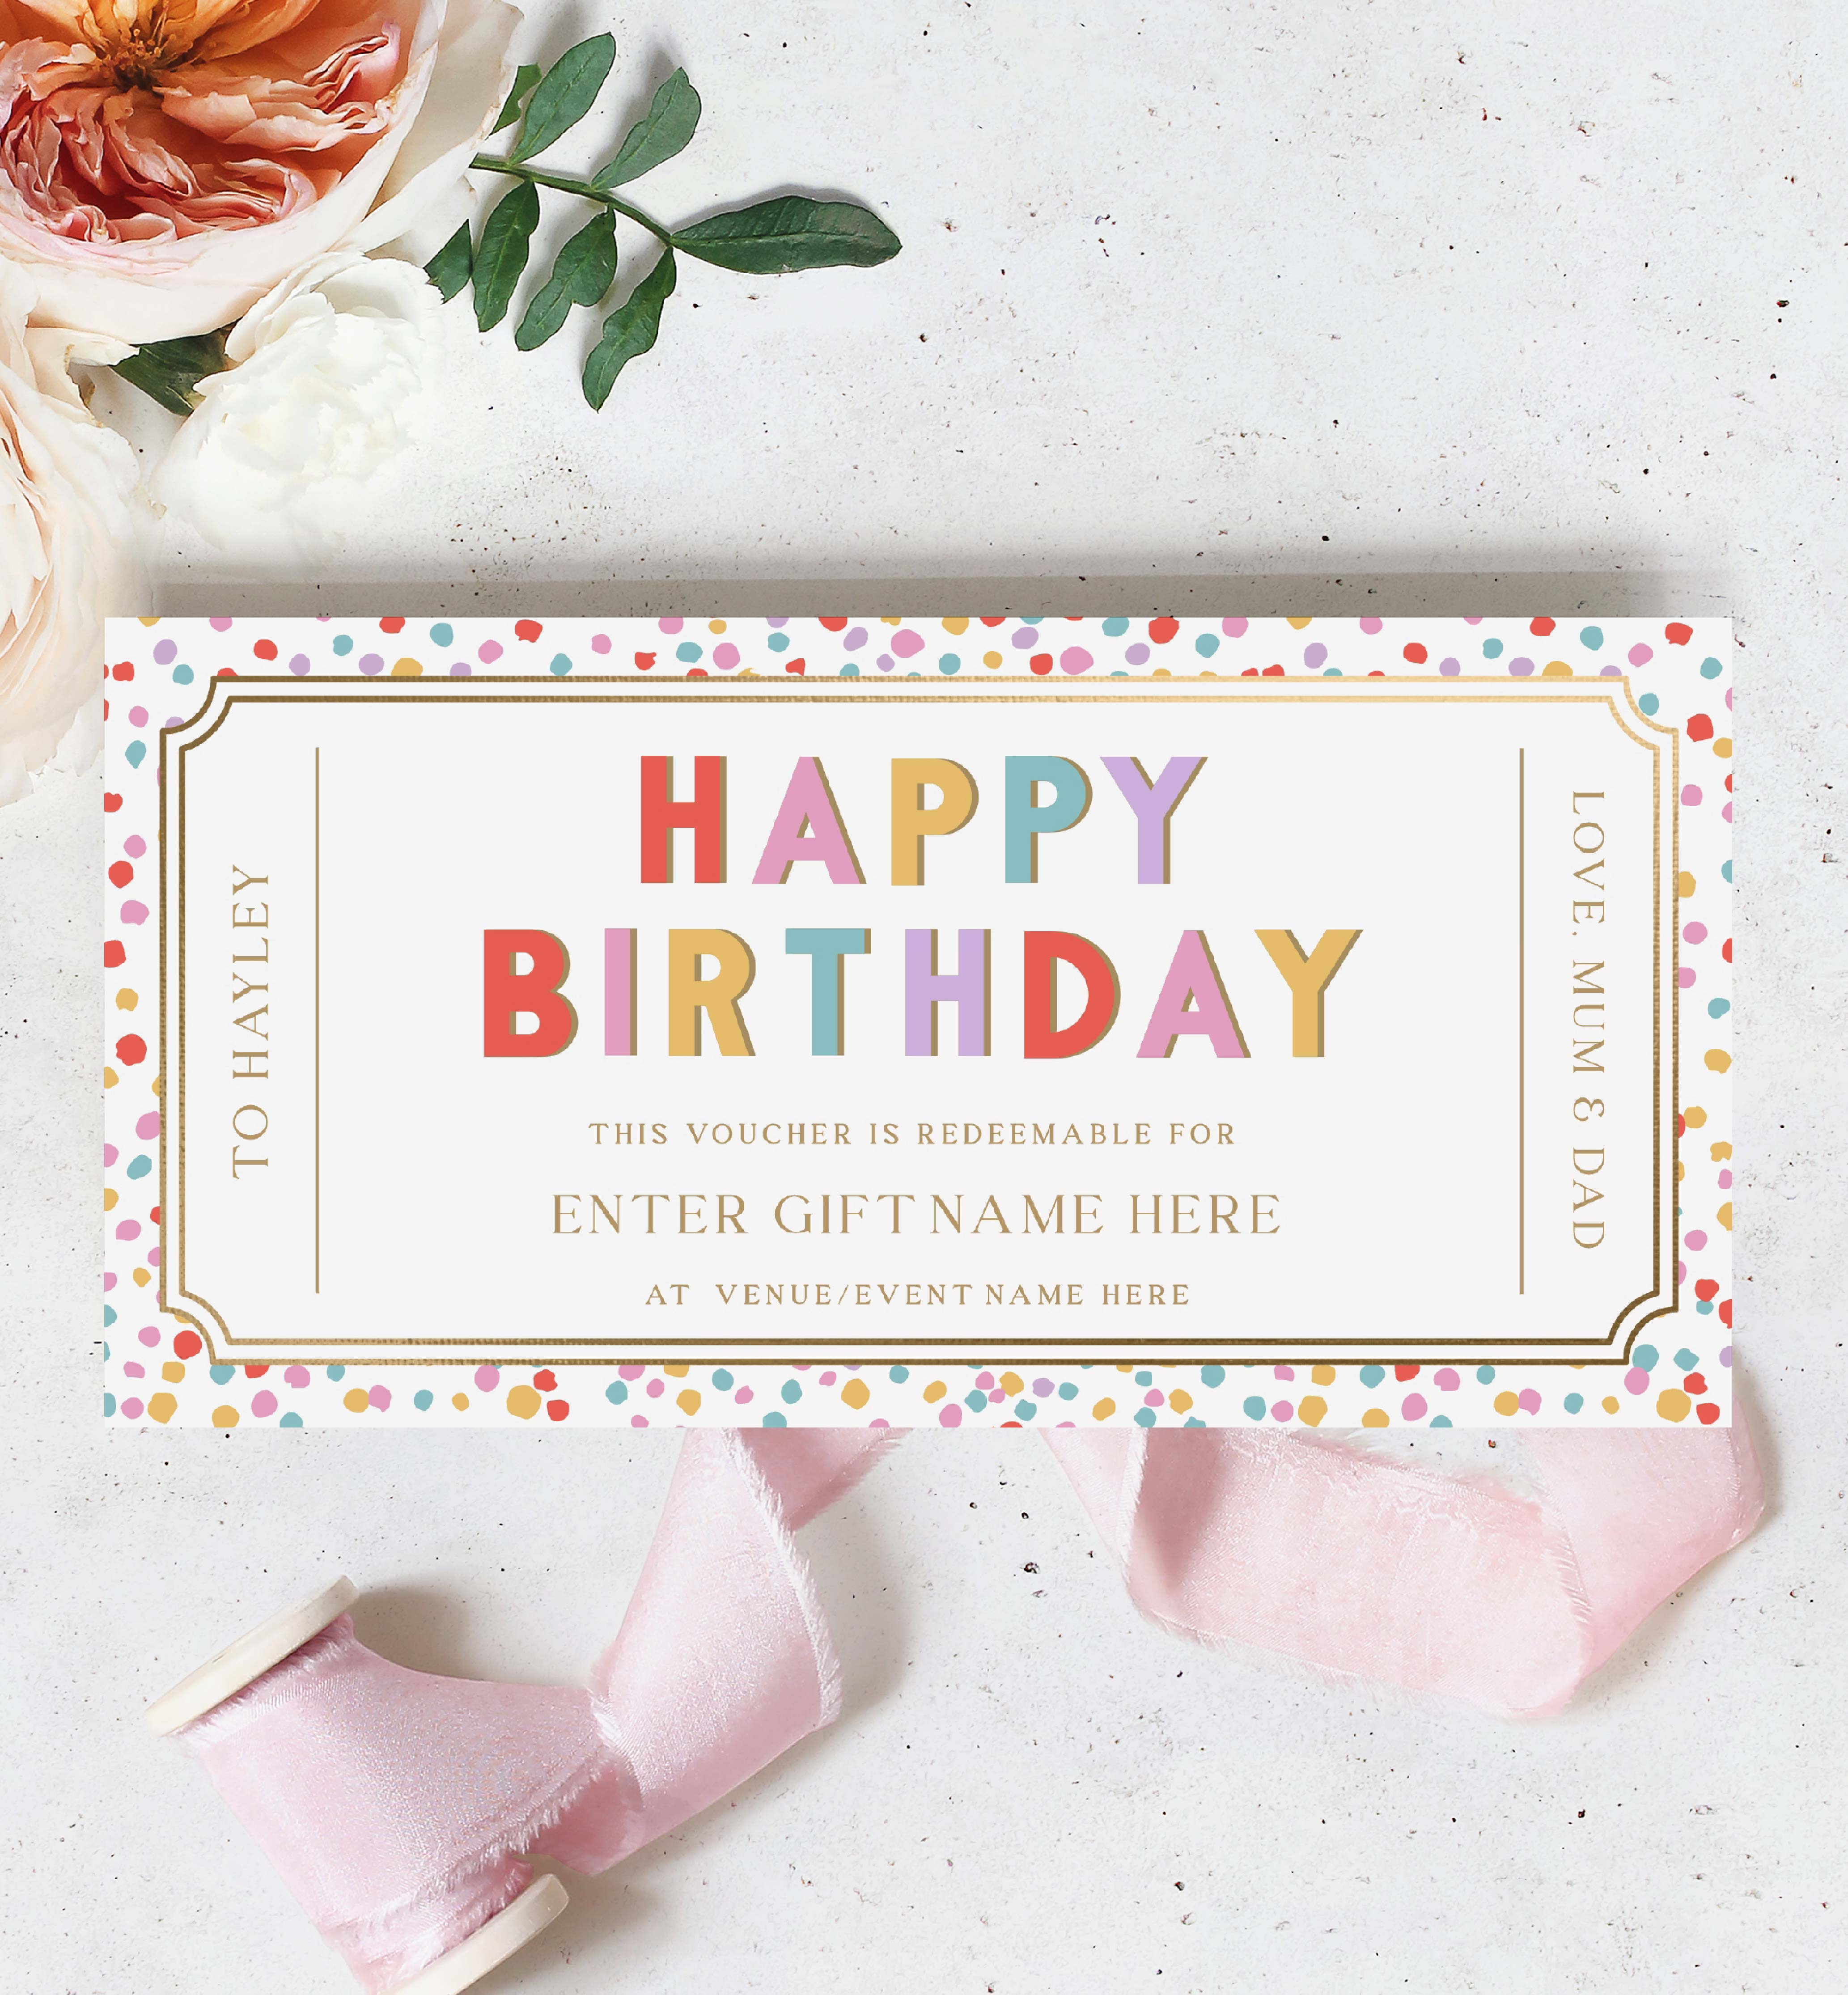 Free Birthday Offers From Restaurants & Retail Stores | Coupons 4 Utah